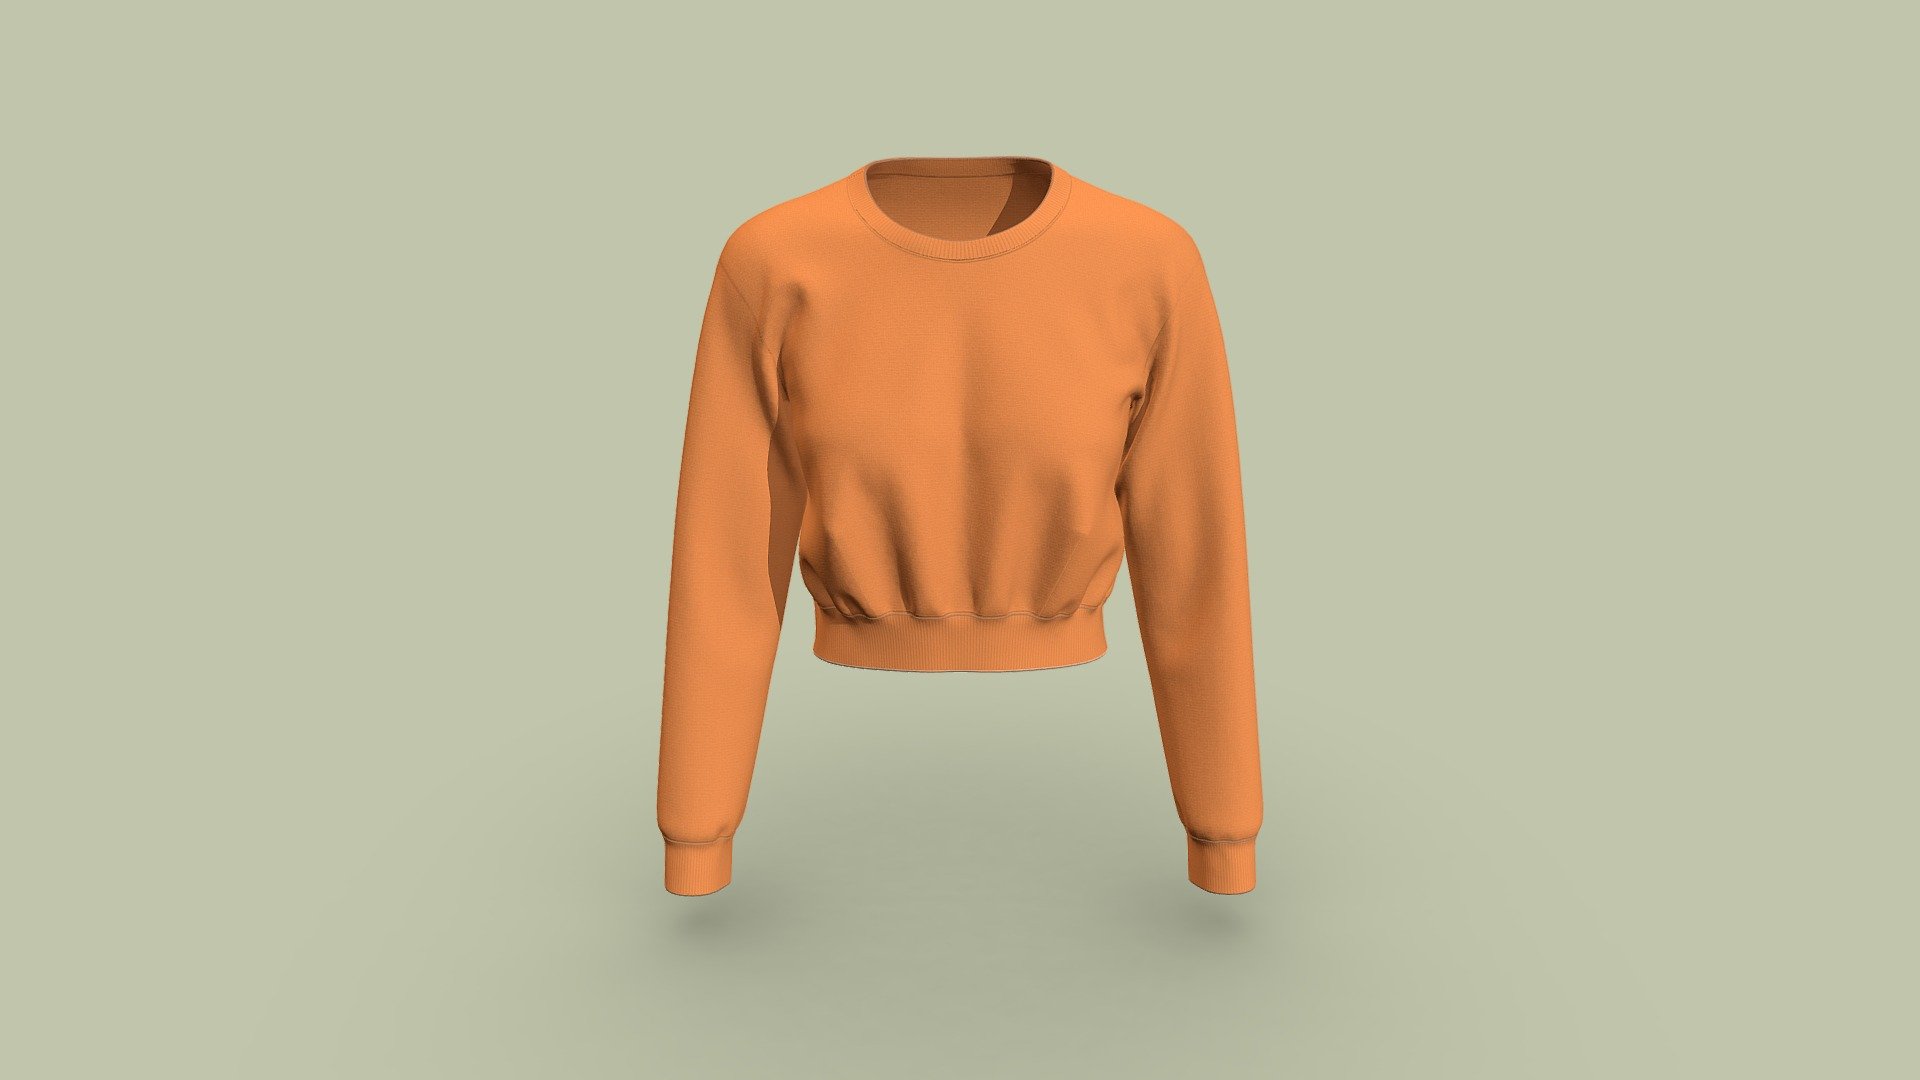 Cloth Title = Cropped Sweatshirt for Women 

SKU = DG100063
 
Category = Women 

Product Type = Sweatshirt 

Cloth Length = Cropped 

Body Fit = Loose Fit 

Occasion = Activewear  

Sleeve Style = Drop Shoulder 


Our Services:

3D Apparel Design.

OBJ,FBX,GLTF Making with High/Low Poly.

Fabric Digitalization.

Mockup making.

3D Teck Pack.

Pattern Making.

2D Illustration

Cloth Animation and 360 Spin Video


Contact us:- 

Email: info@digitalfashionwear.com 

Website: https://digitalfashionwear.com 

WhatsApp No: +8801759350445 


We designed all the types of cloth specially focused on product visualization, e-commerce, fitting, and production. 

We will design: 

T-shirts 

Polo shirts 

Hoodies 

Sweatshirt 

Jackets 

Shirts 

TankTops 

Trousers 

Bras 

Underwear 

Blazer 

Aprons 

Leggings 

and All Fashion items





Our goal is to make sure what we provide you, meets your demand 3d model